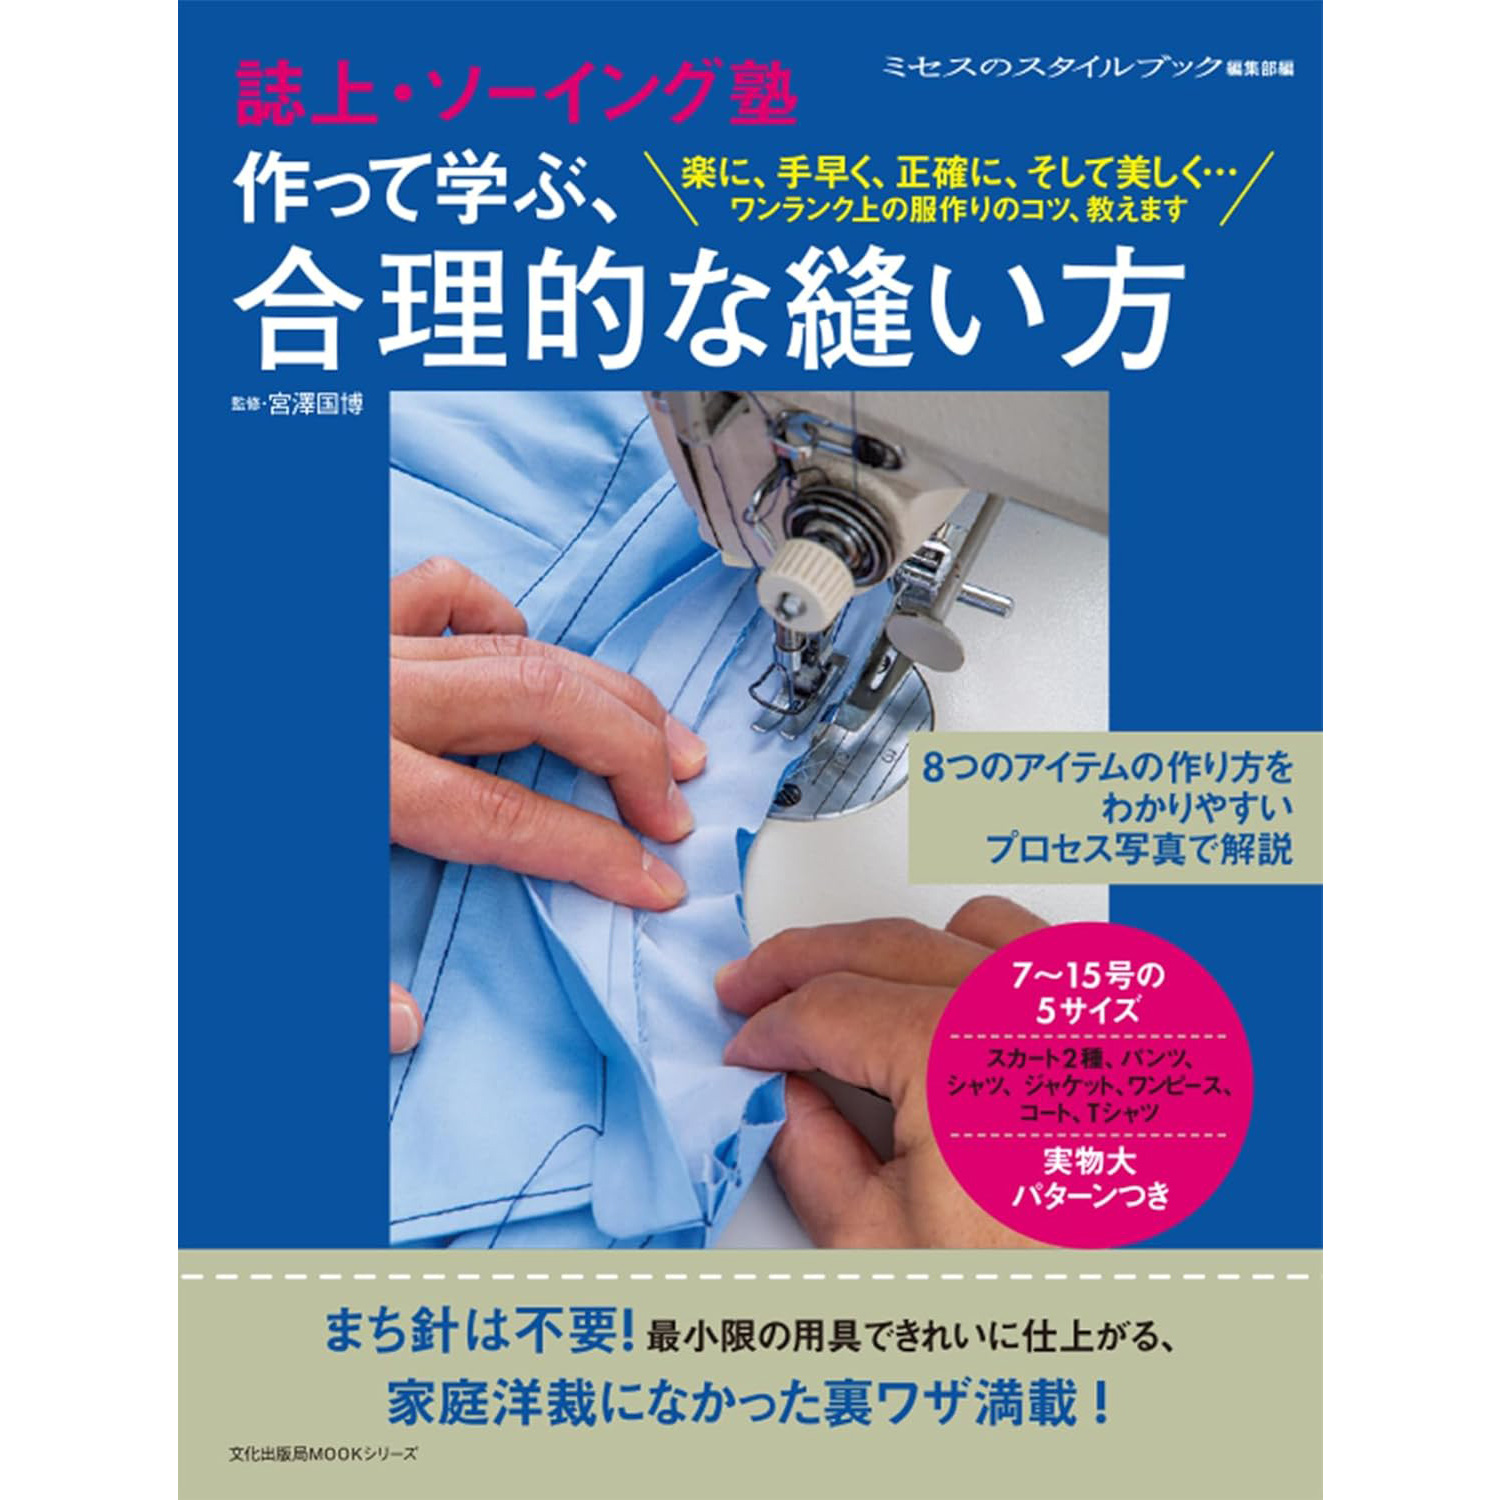 BKS07352 Magazine・Sewing school Make and learn how to sew rationally. （book）